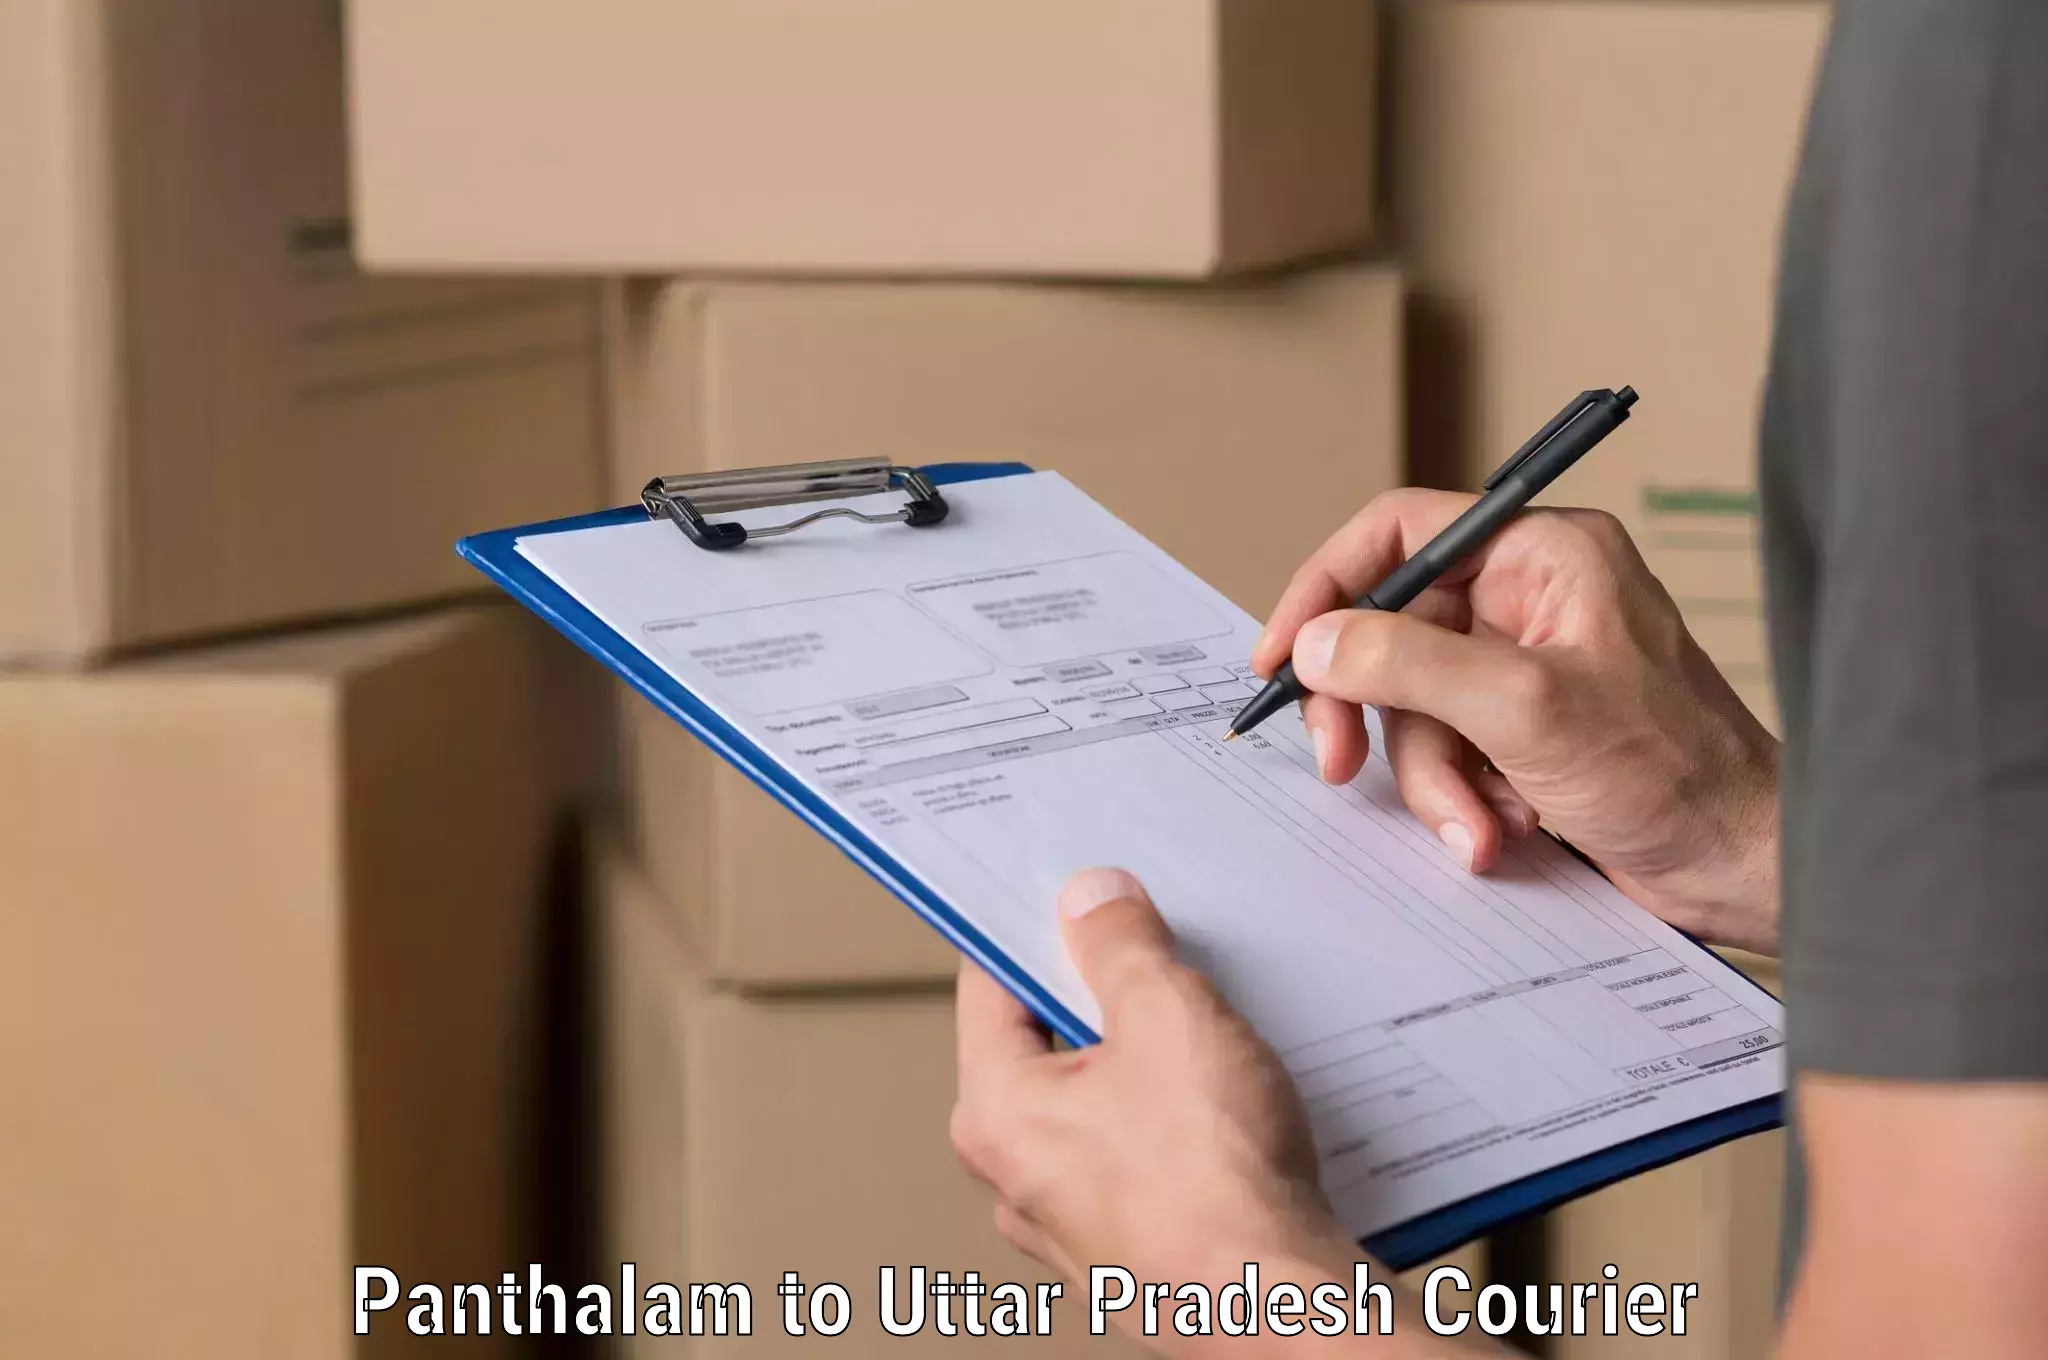 Automated shipping processes Panthalam to Agra